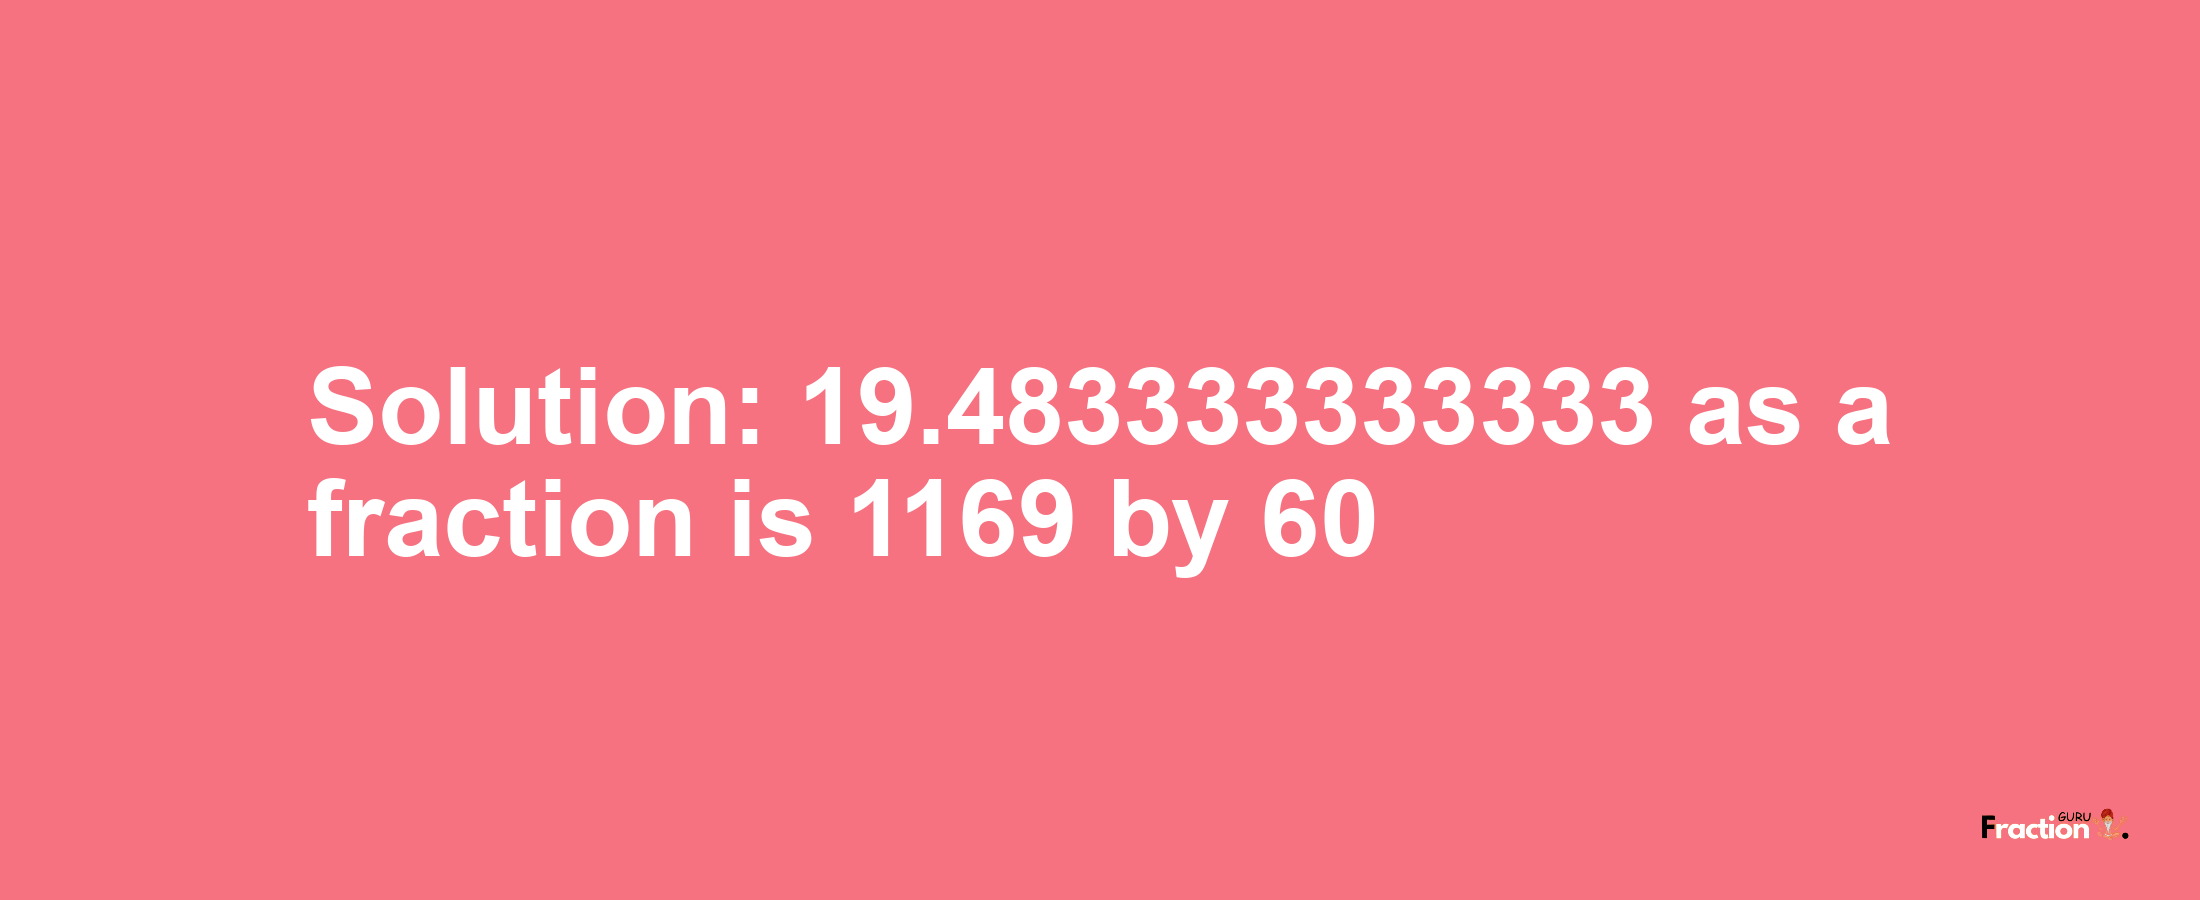 Solution:19.483333333333 as a fraction is 1169/60